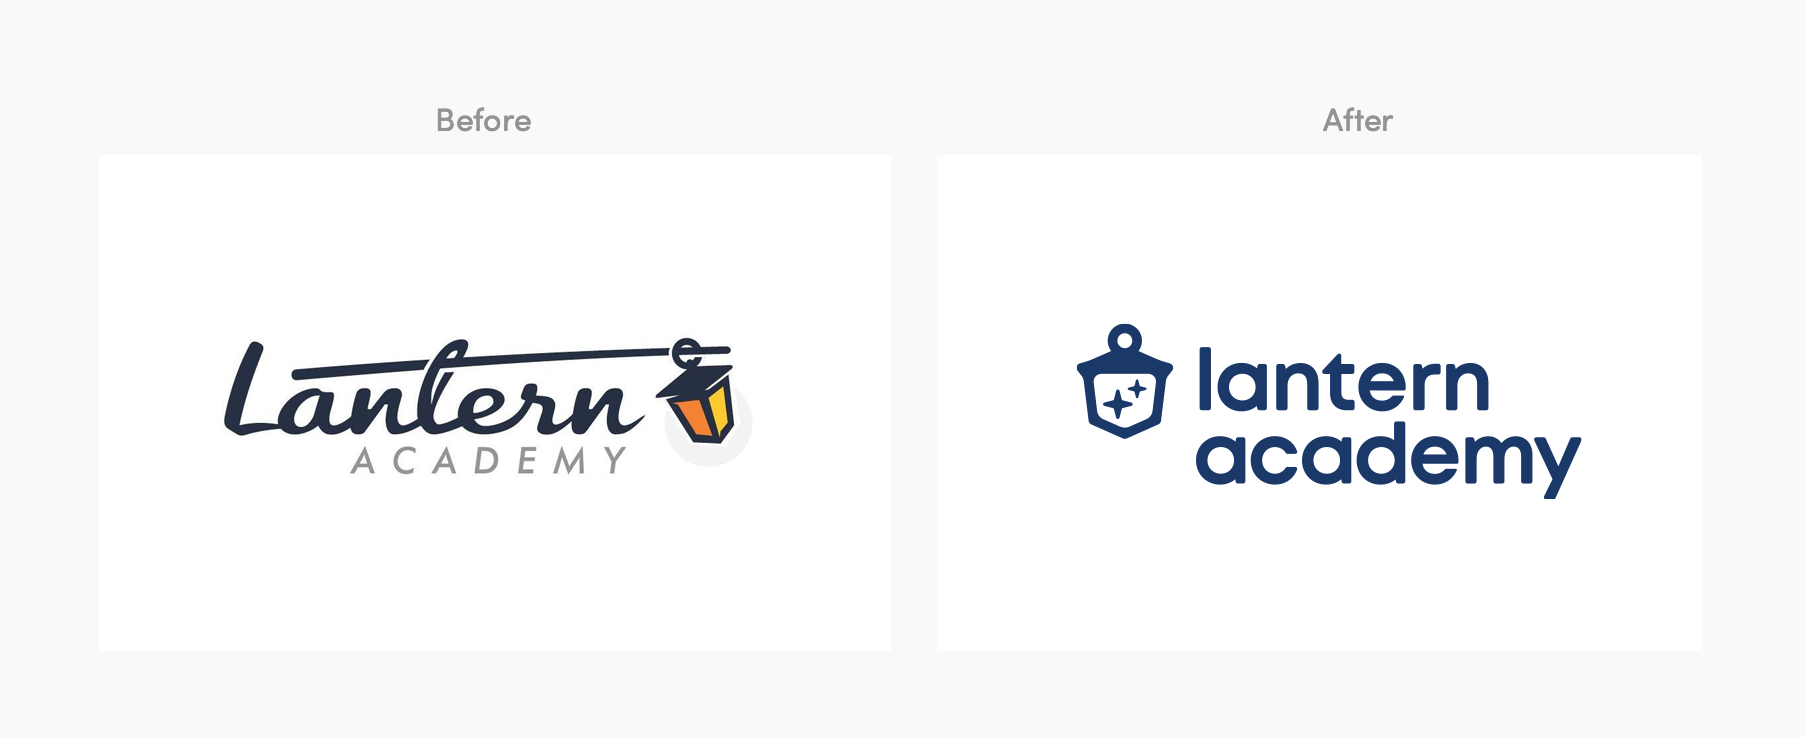 Wordmark Logo Design: A Beginners Guide (With Examples) - Looka